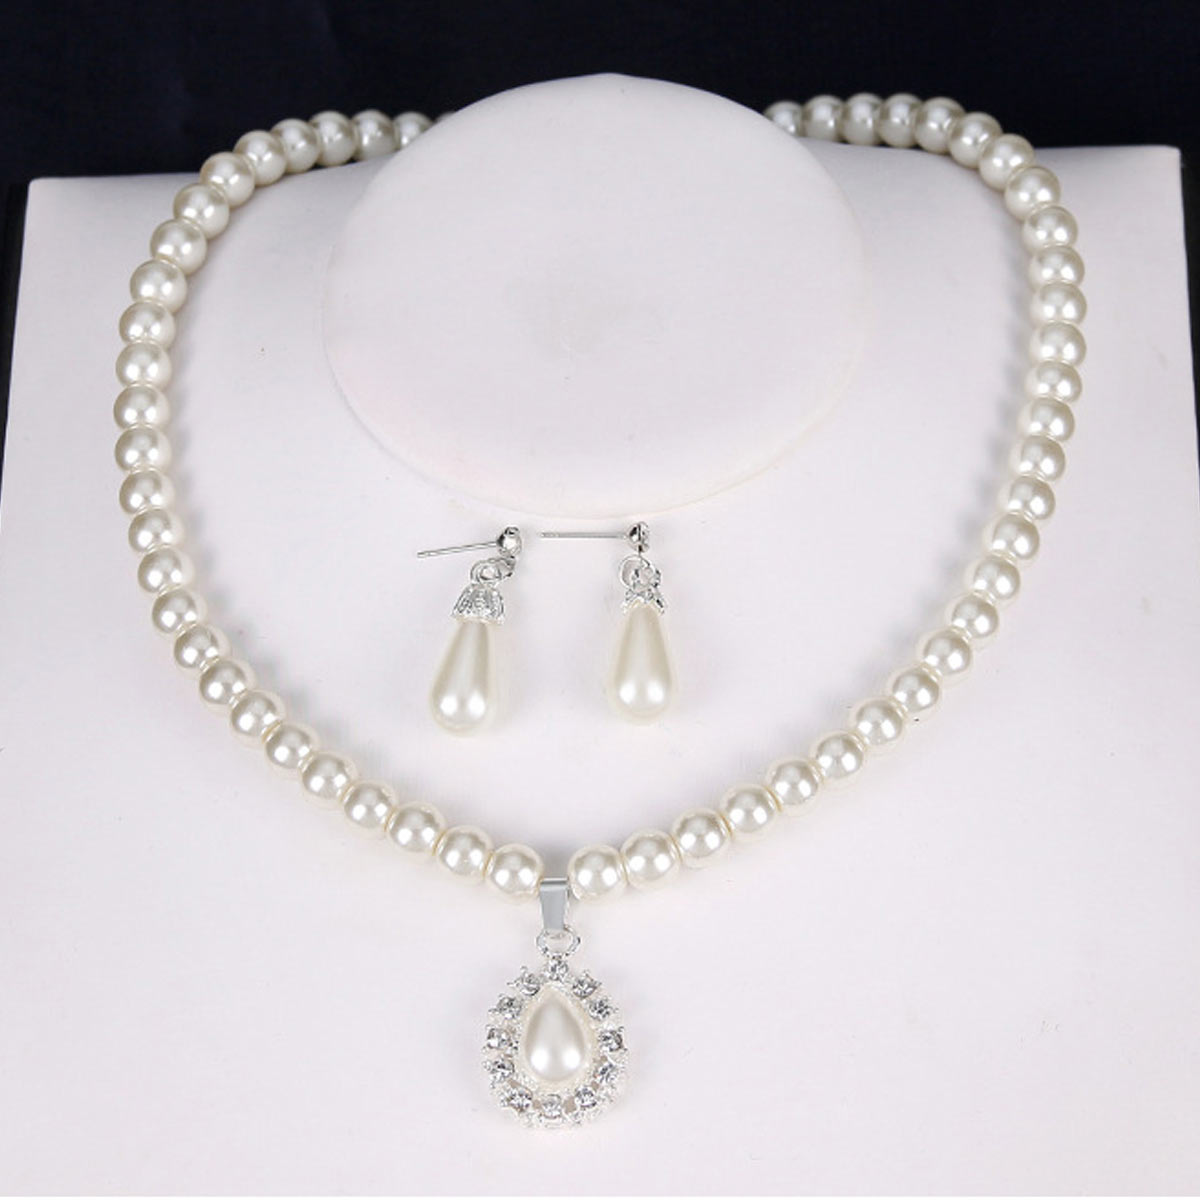 Cream Rhinestone Pearl Water Drop Shape Earrings and Necklace